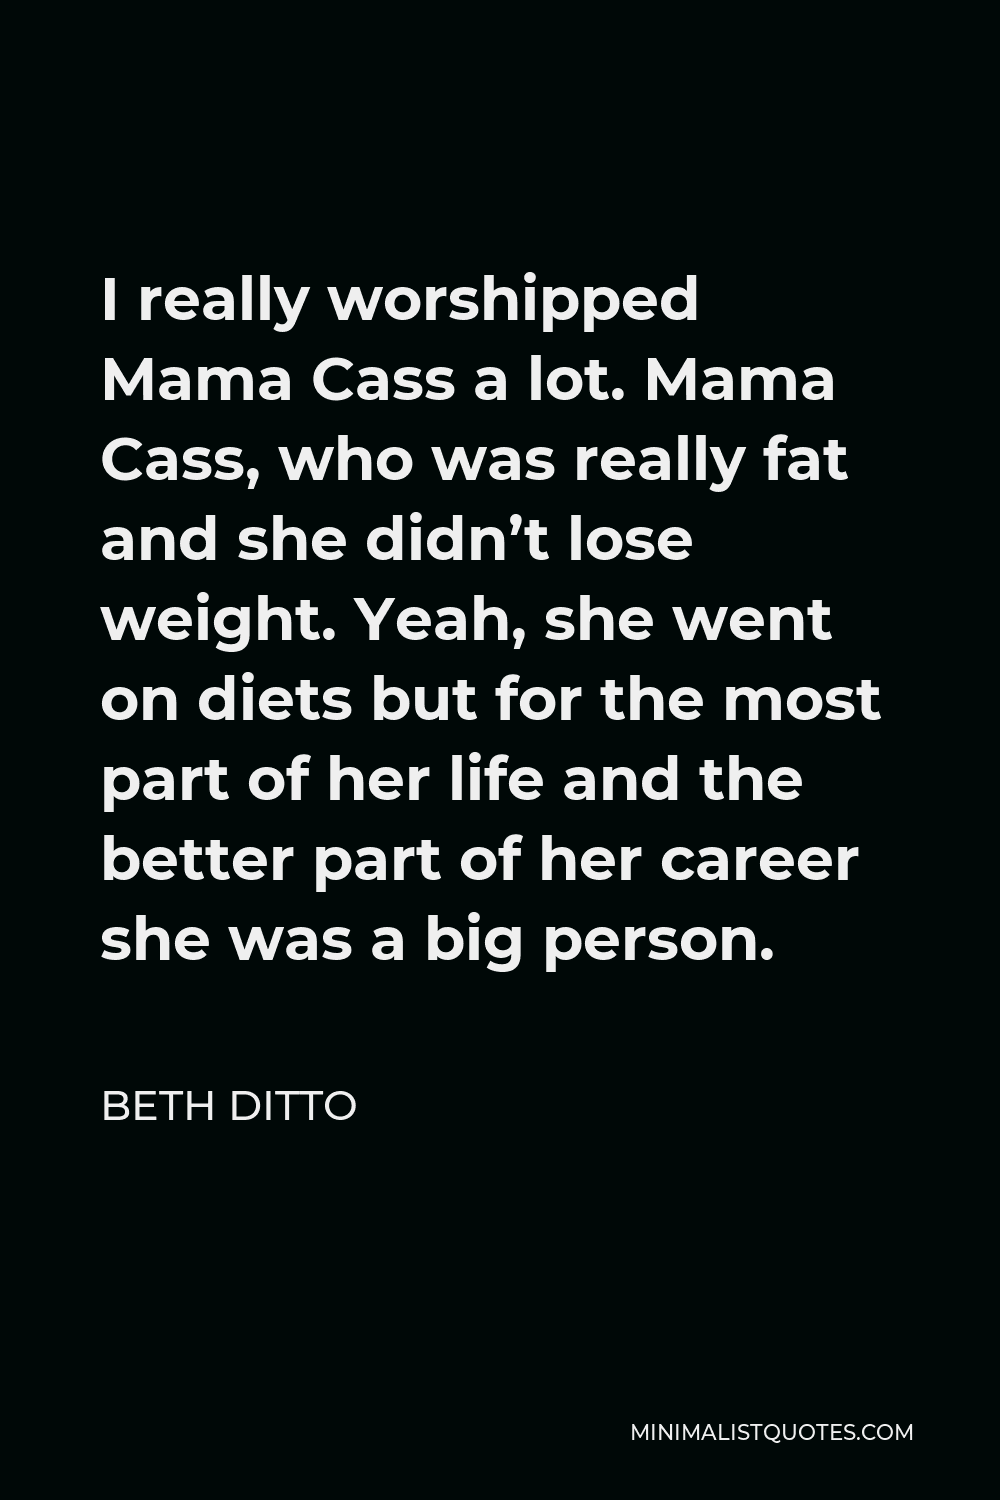 Beth Ditto Quote - I really worshipped Mama Cass a lot. Mama Cass, who was really fat and she didn’t lose weight. Yeah, she went on diets but for the most part of her life and the better part of her career she was a big person.